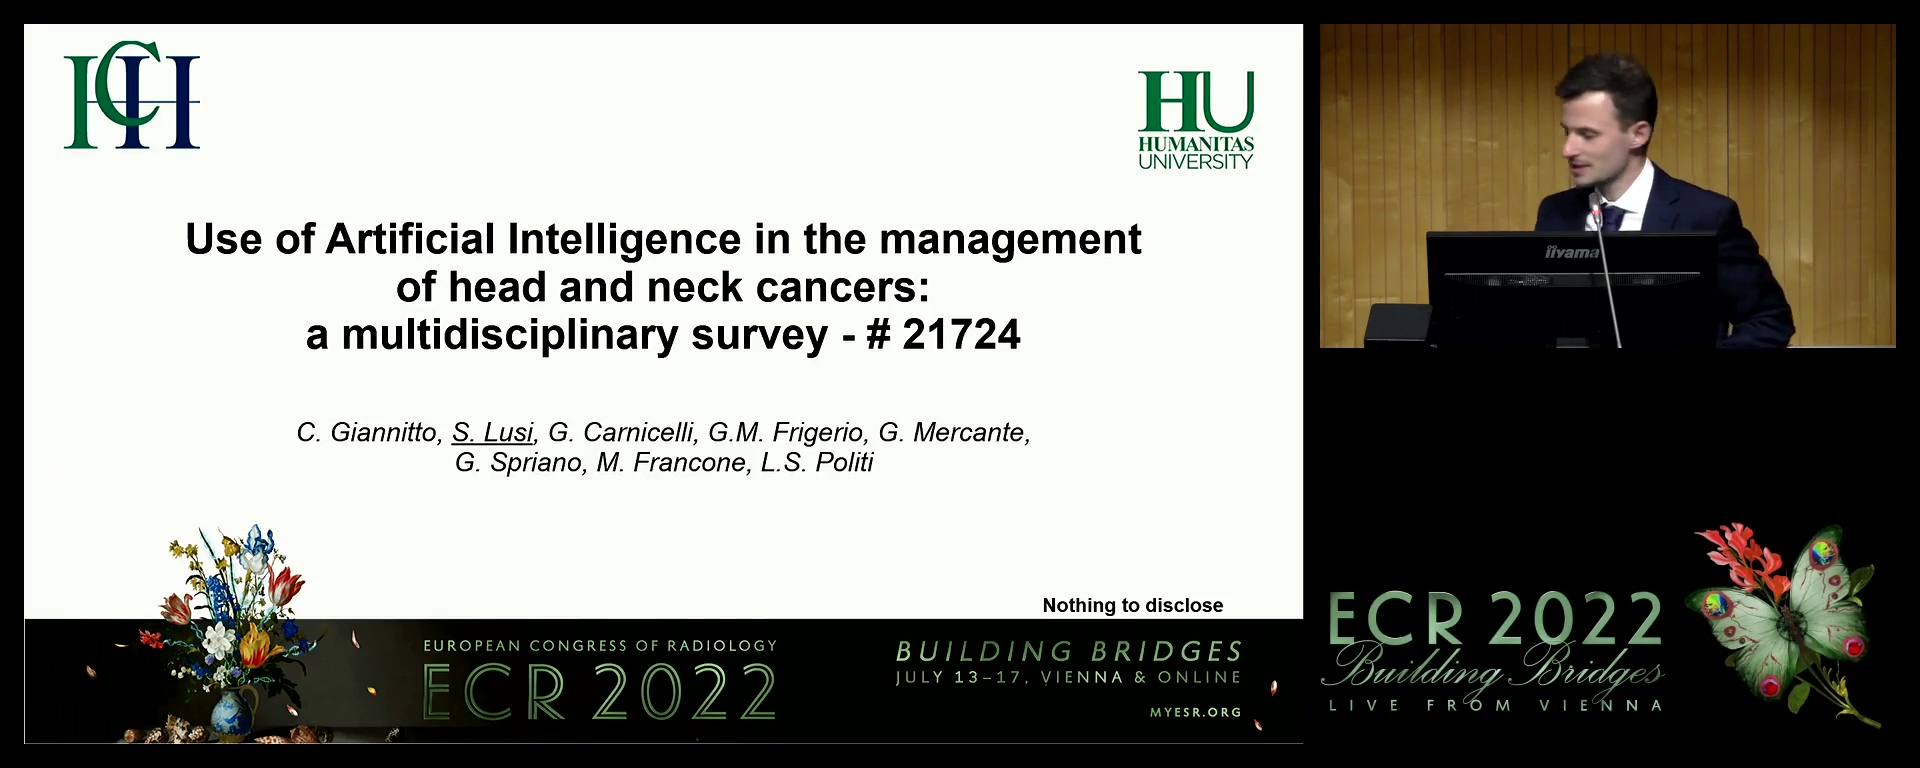 Use of artificial intelligence in management of head-neck tumours: a multidisciplinary survey